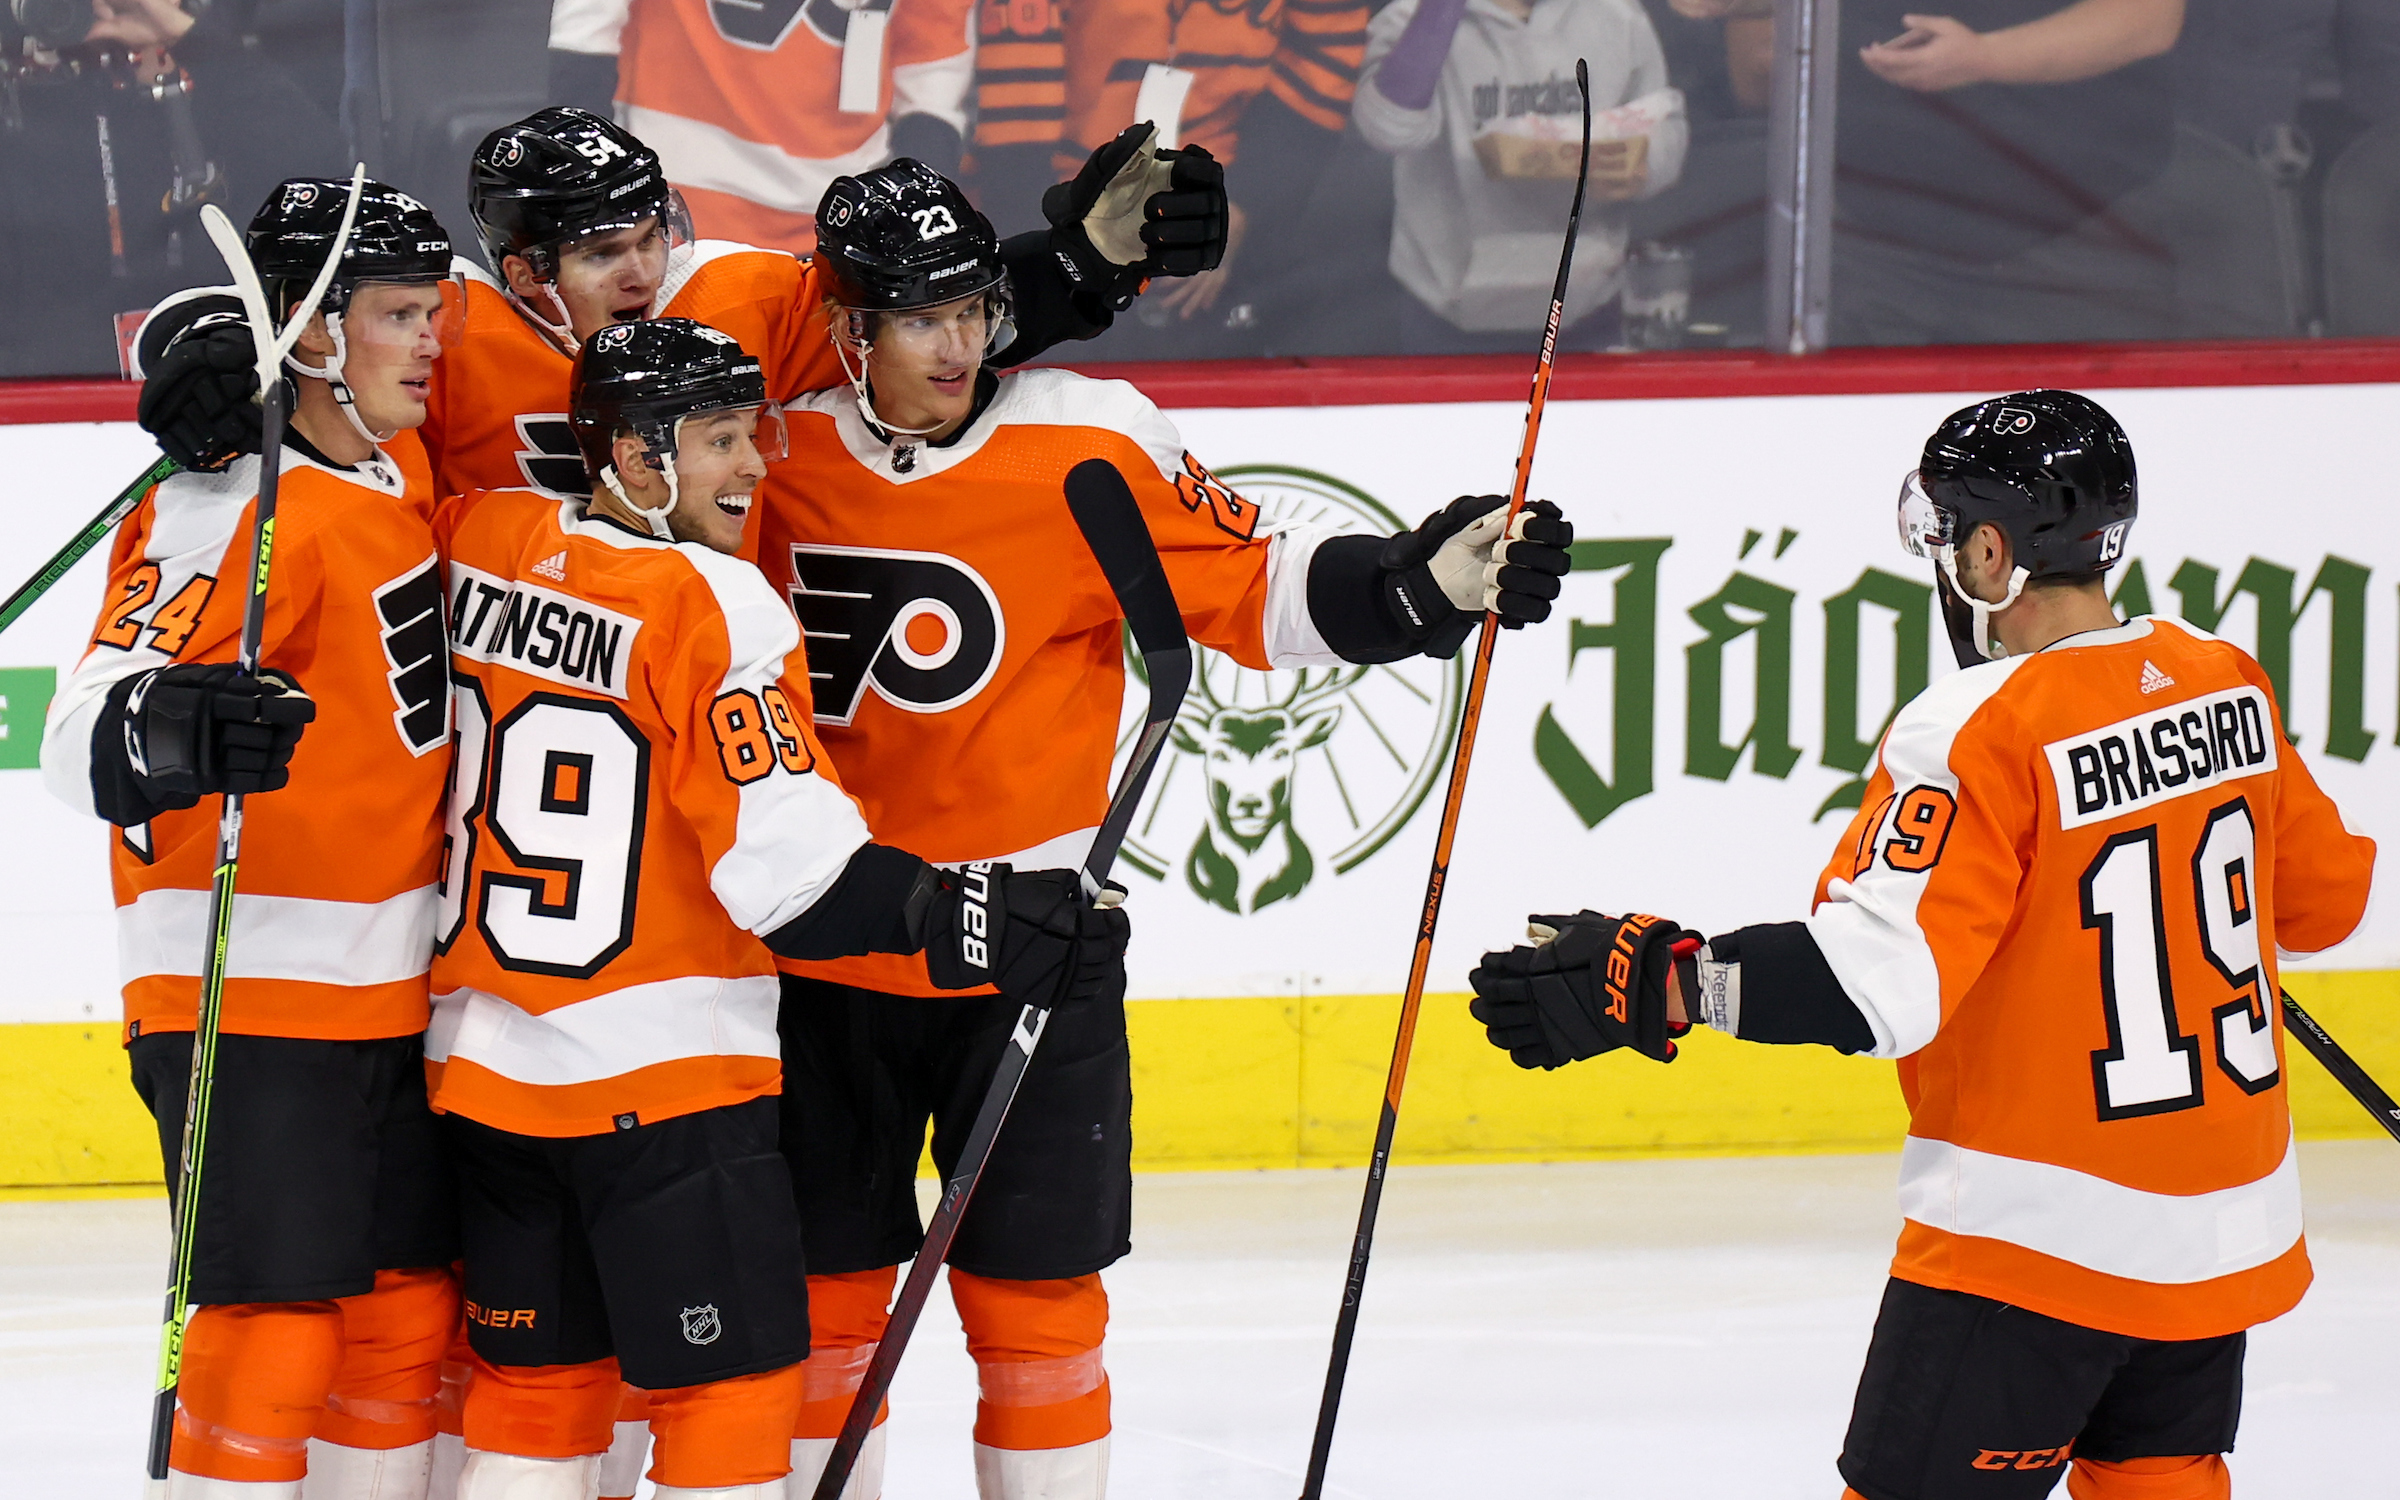 Flyers blown out in preseason opener as Sean Couturier returns and